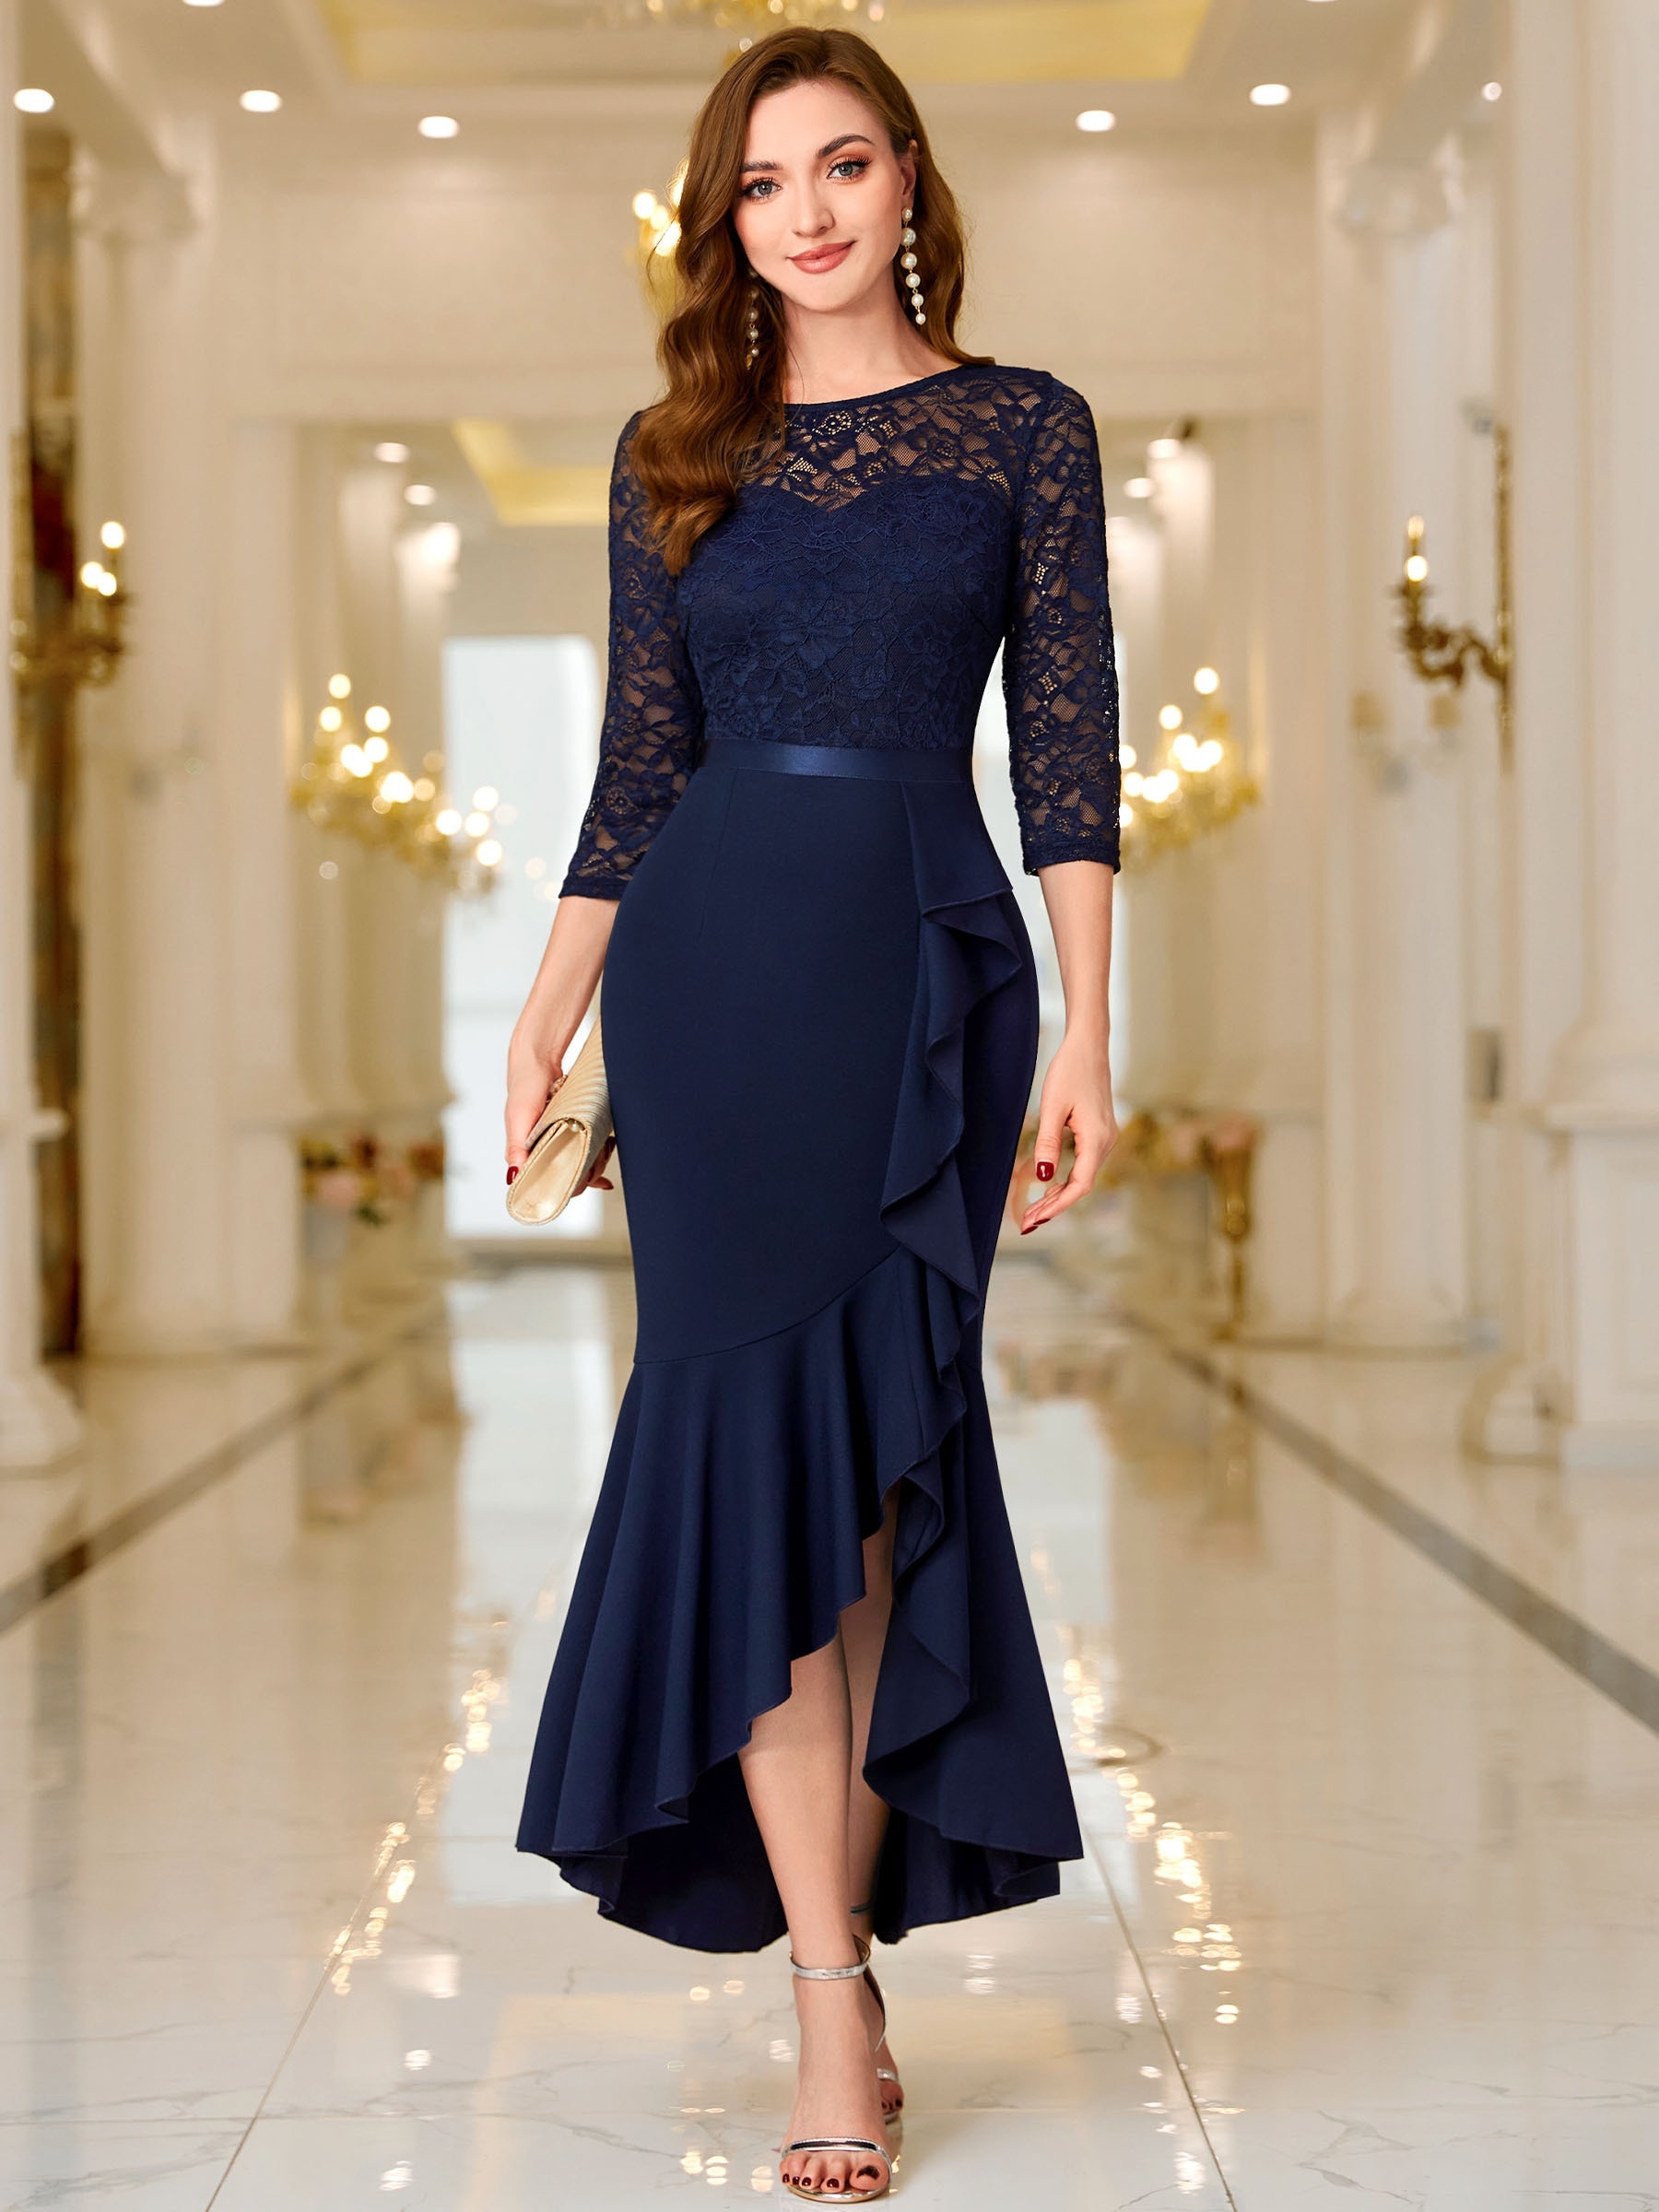 NAVYBLUE LACE DRESS WITH FRILLS